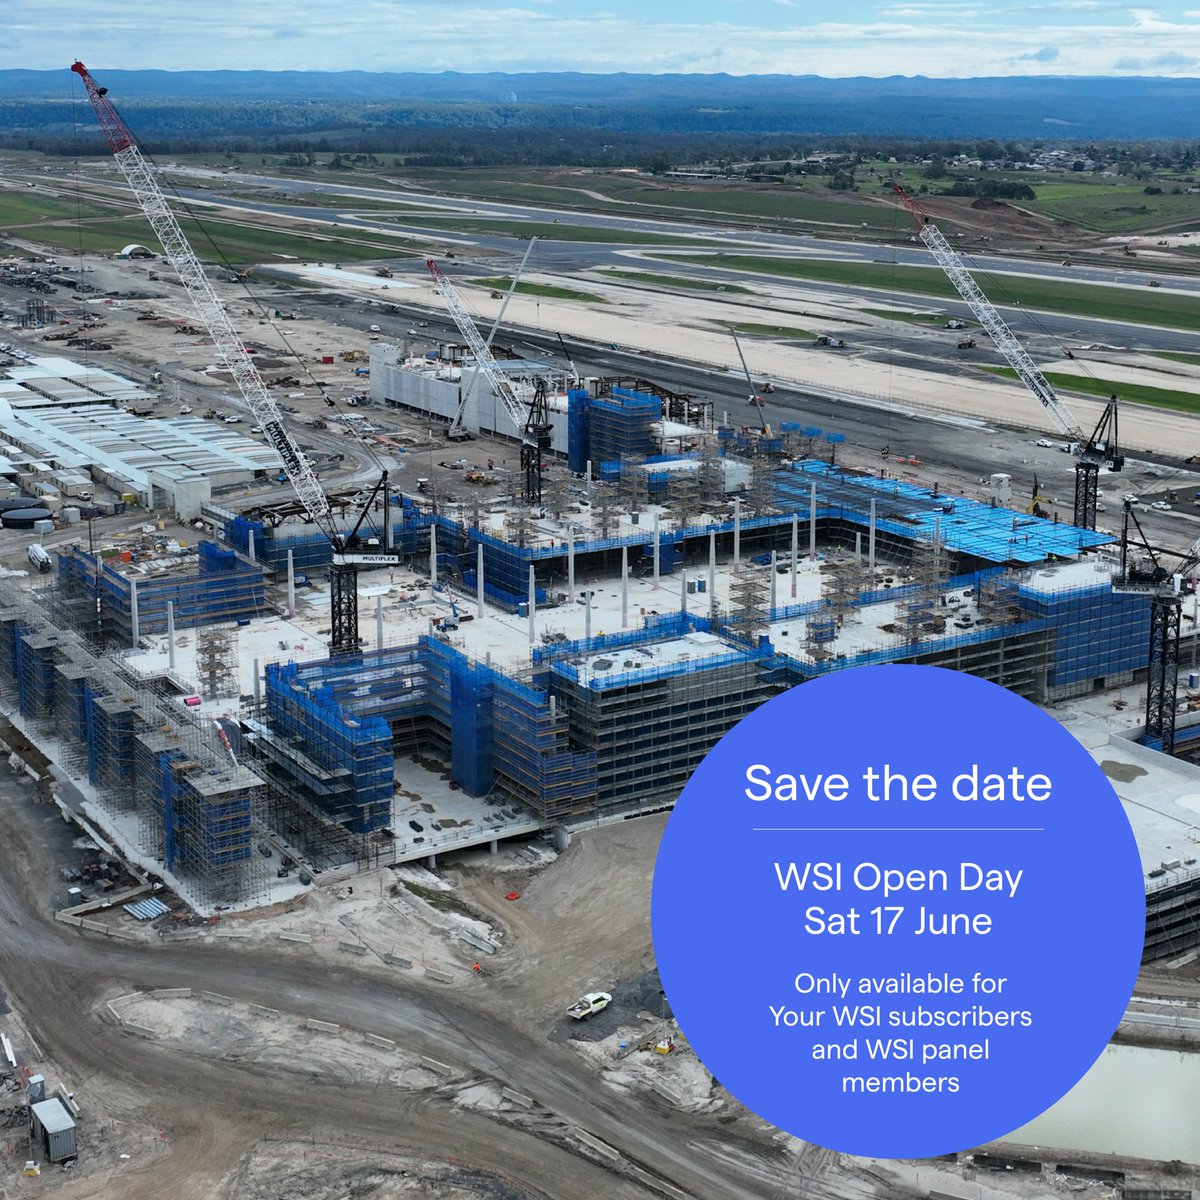 SAVE THE DATE! ✈️ We'll be opening the gates for our Community Open Day on June 17. Tickets will be available for YourWSI subscribers and panel members. Details will be e-mailed in the coming weeks. Sign up here: bit.ly/45nphKj